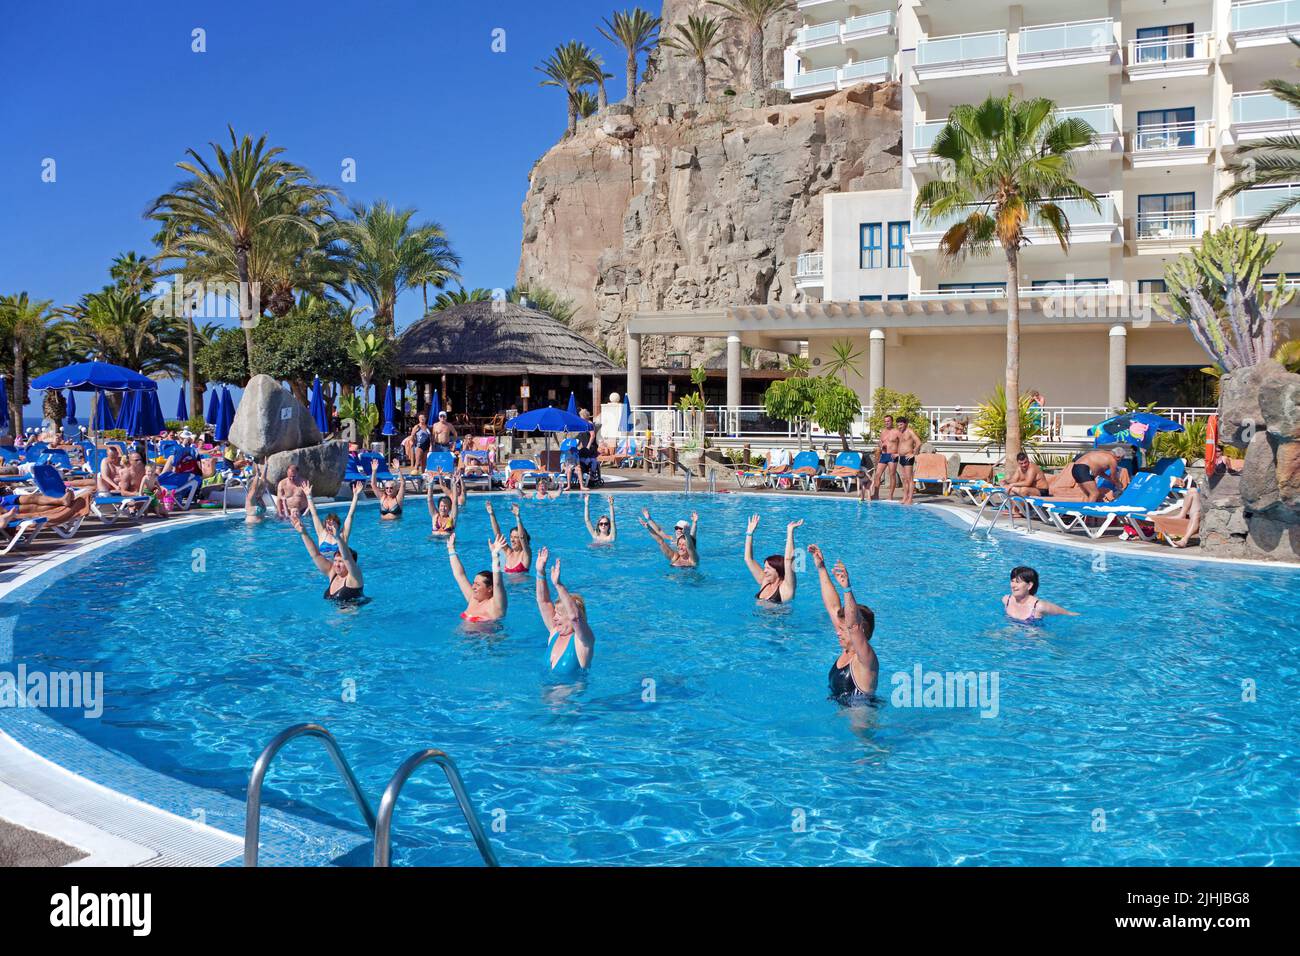 Pool animation at a hotel, Taurito, Grand Canary, Canary islands, Spain, Europe Stock Photo